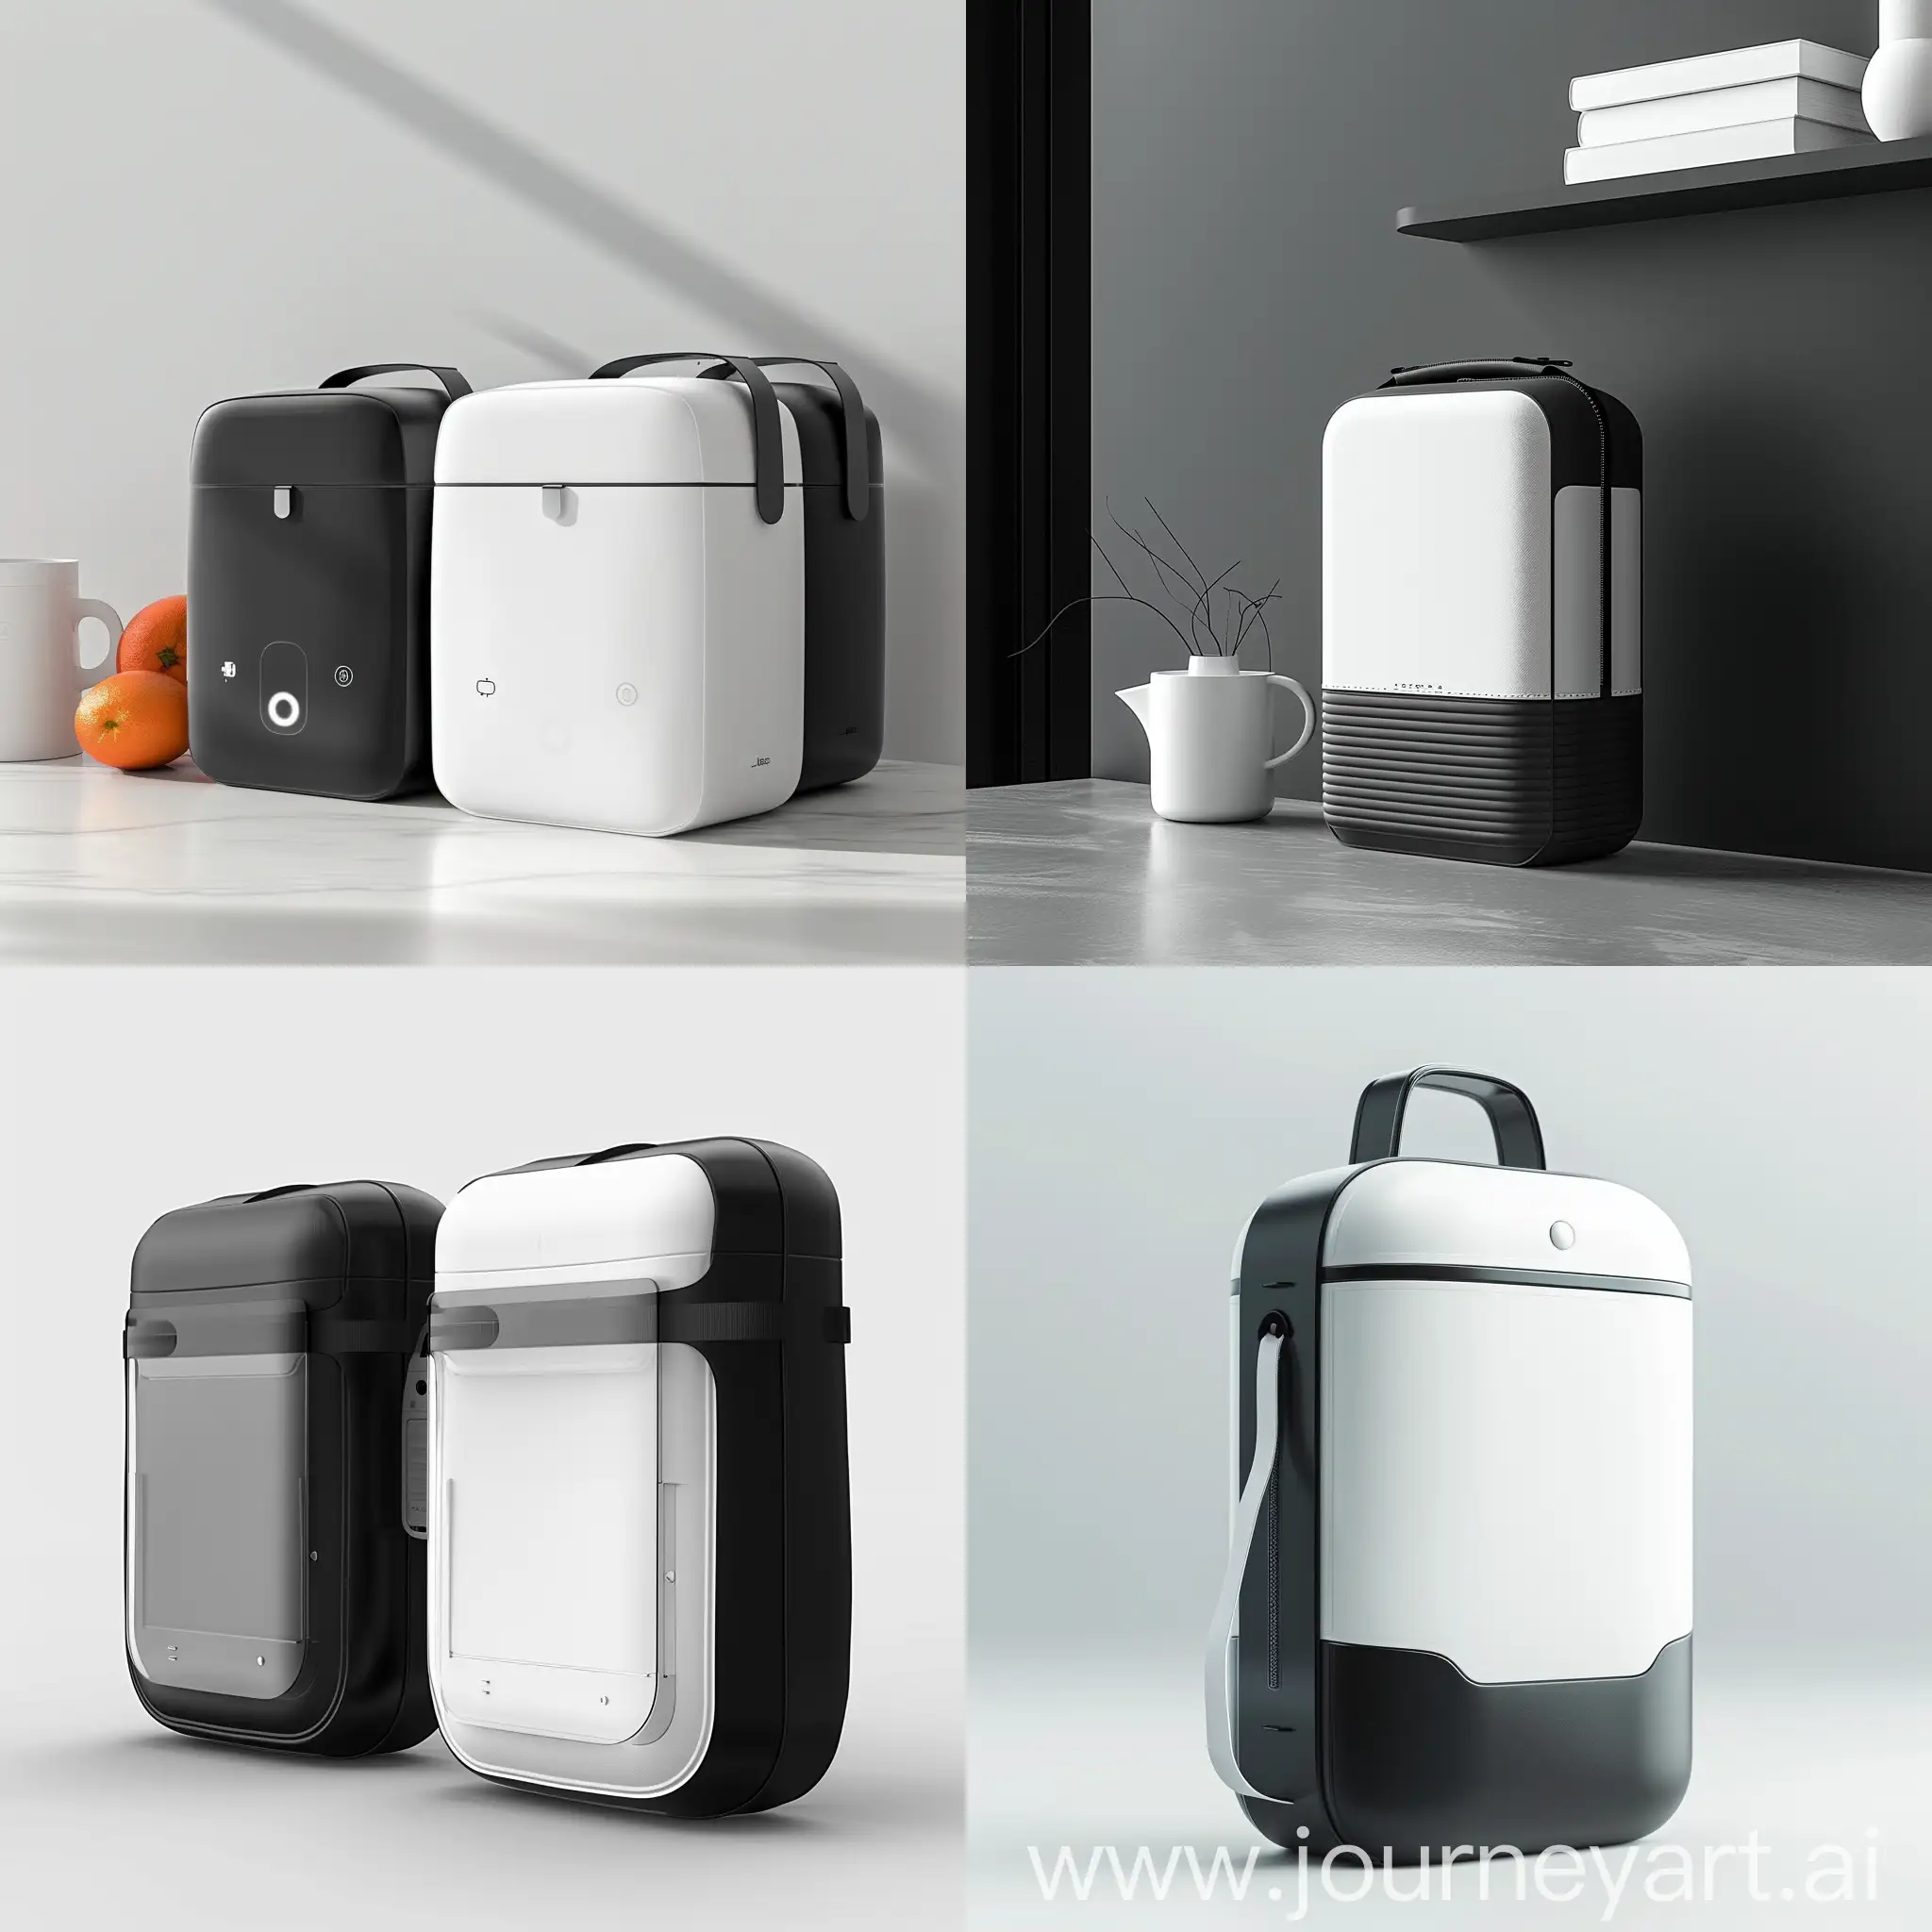 An innovative concept of a non-electric compact frozen food warmer bag designed in a sleek, modernist style, influenced by Bauhaus principles, with a minimalist color palette of black and white, high contrast, emphasizing functionality and efficiency